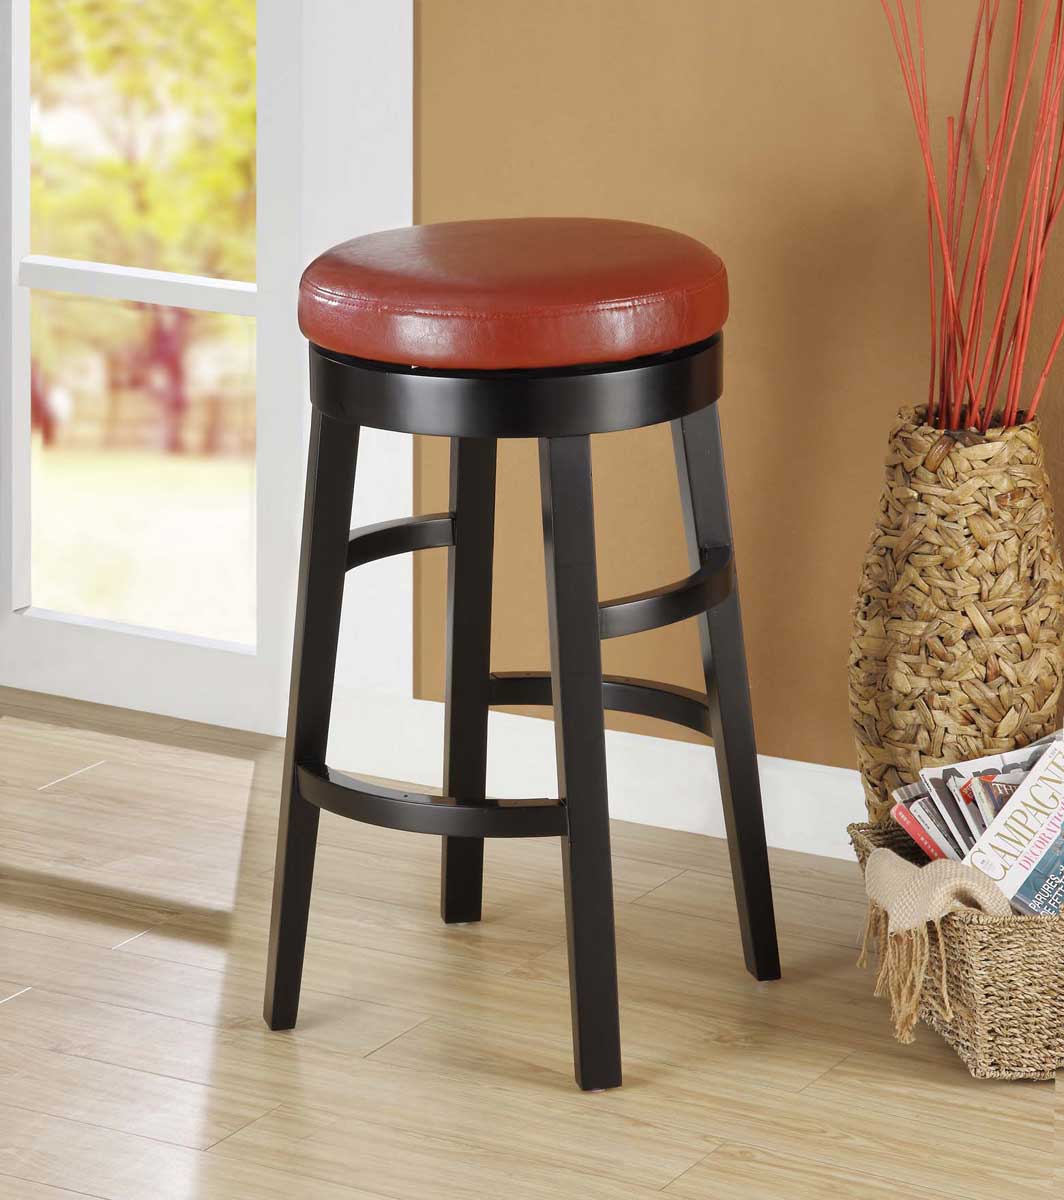 Armen Living Halo 30 Inch Swivel Barstool - Red Bicast Leather